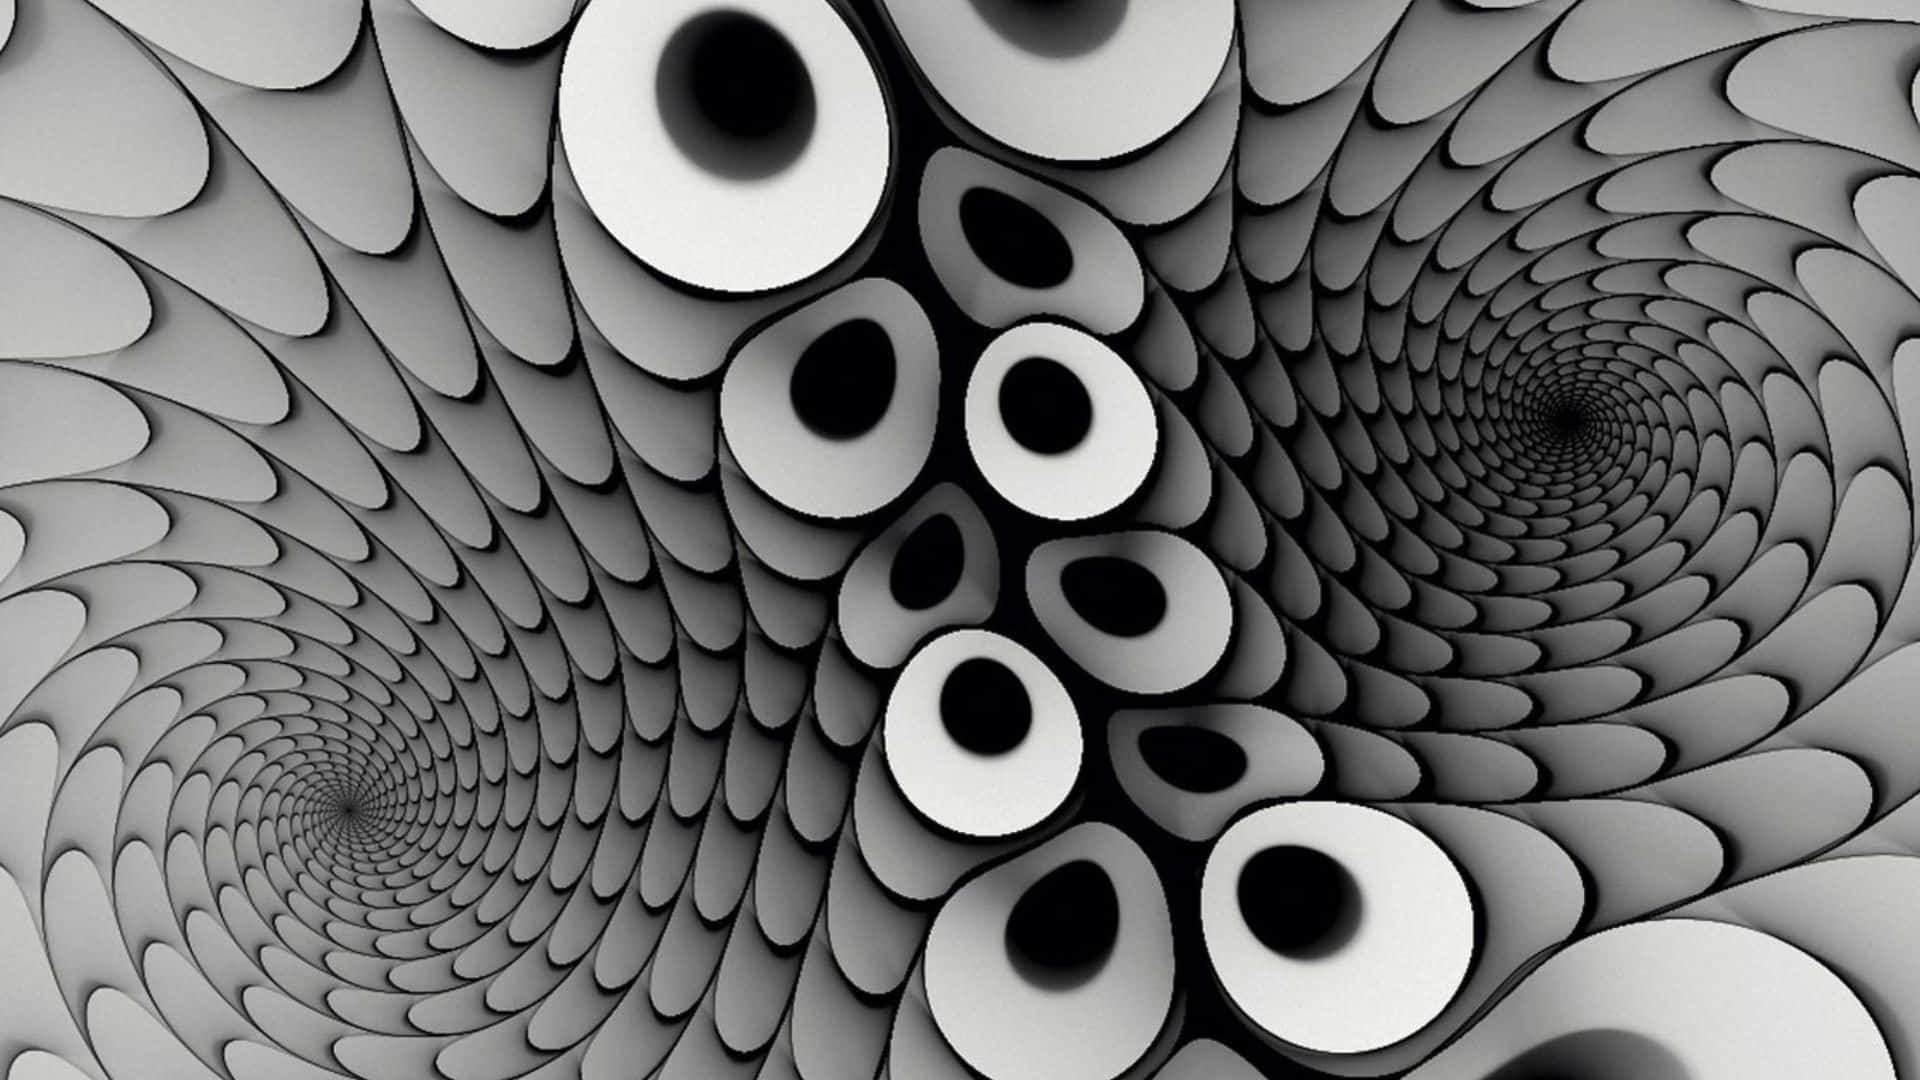 A Mind-bending Optical Illusion with Swirling Patterns Wallpaper